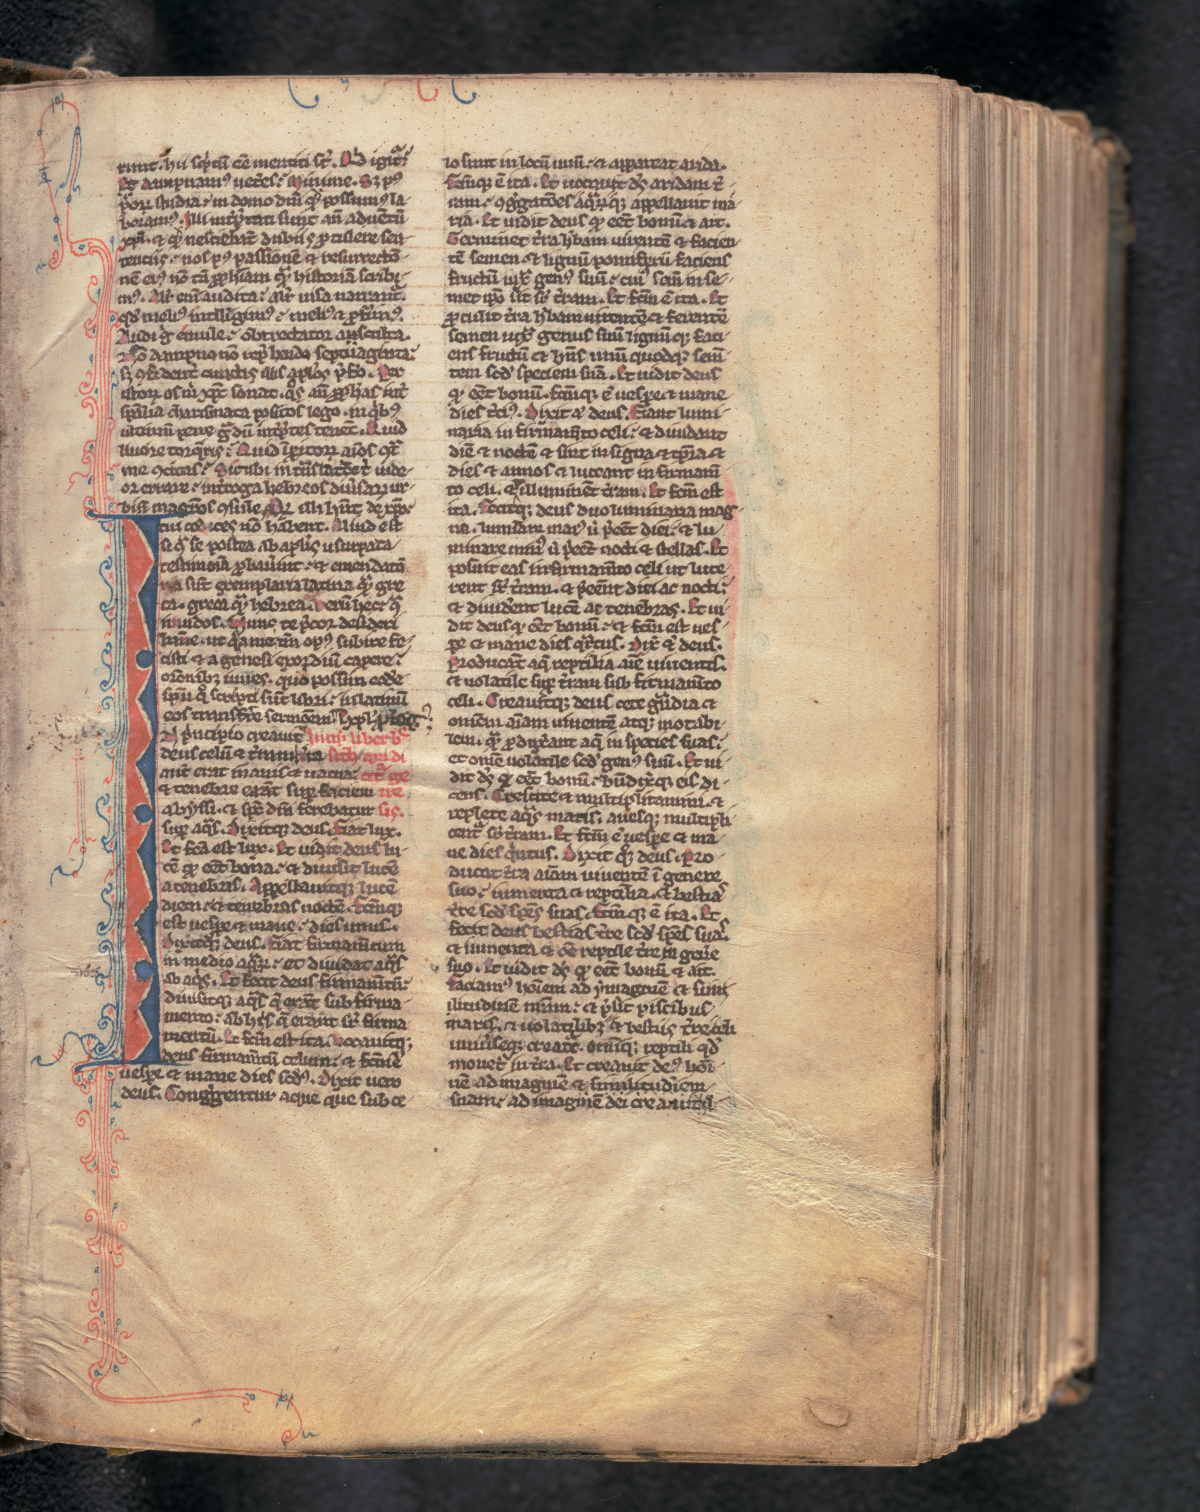 A richly decorated handwritten page from an old bible. It is written in Latin. The text is in black ink. In the margins of the page are blue and red decorations